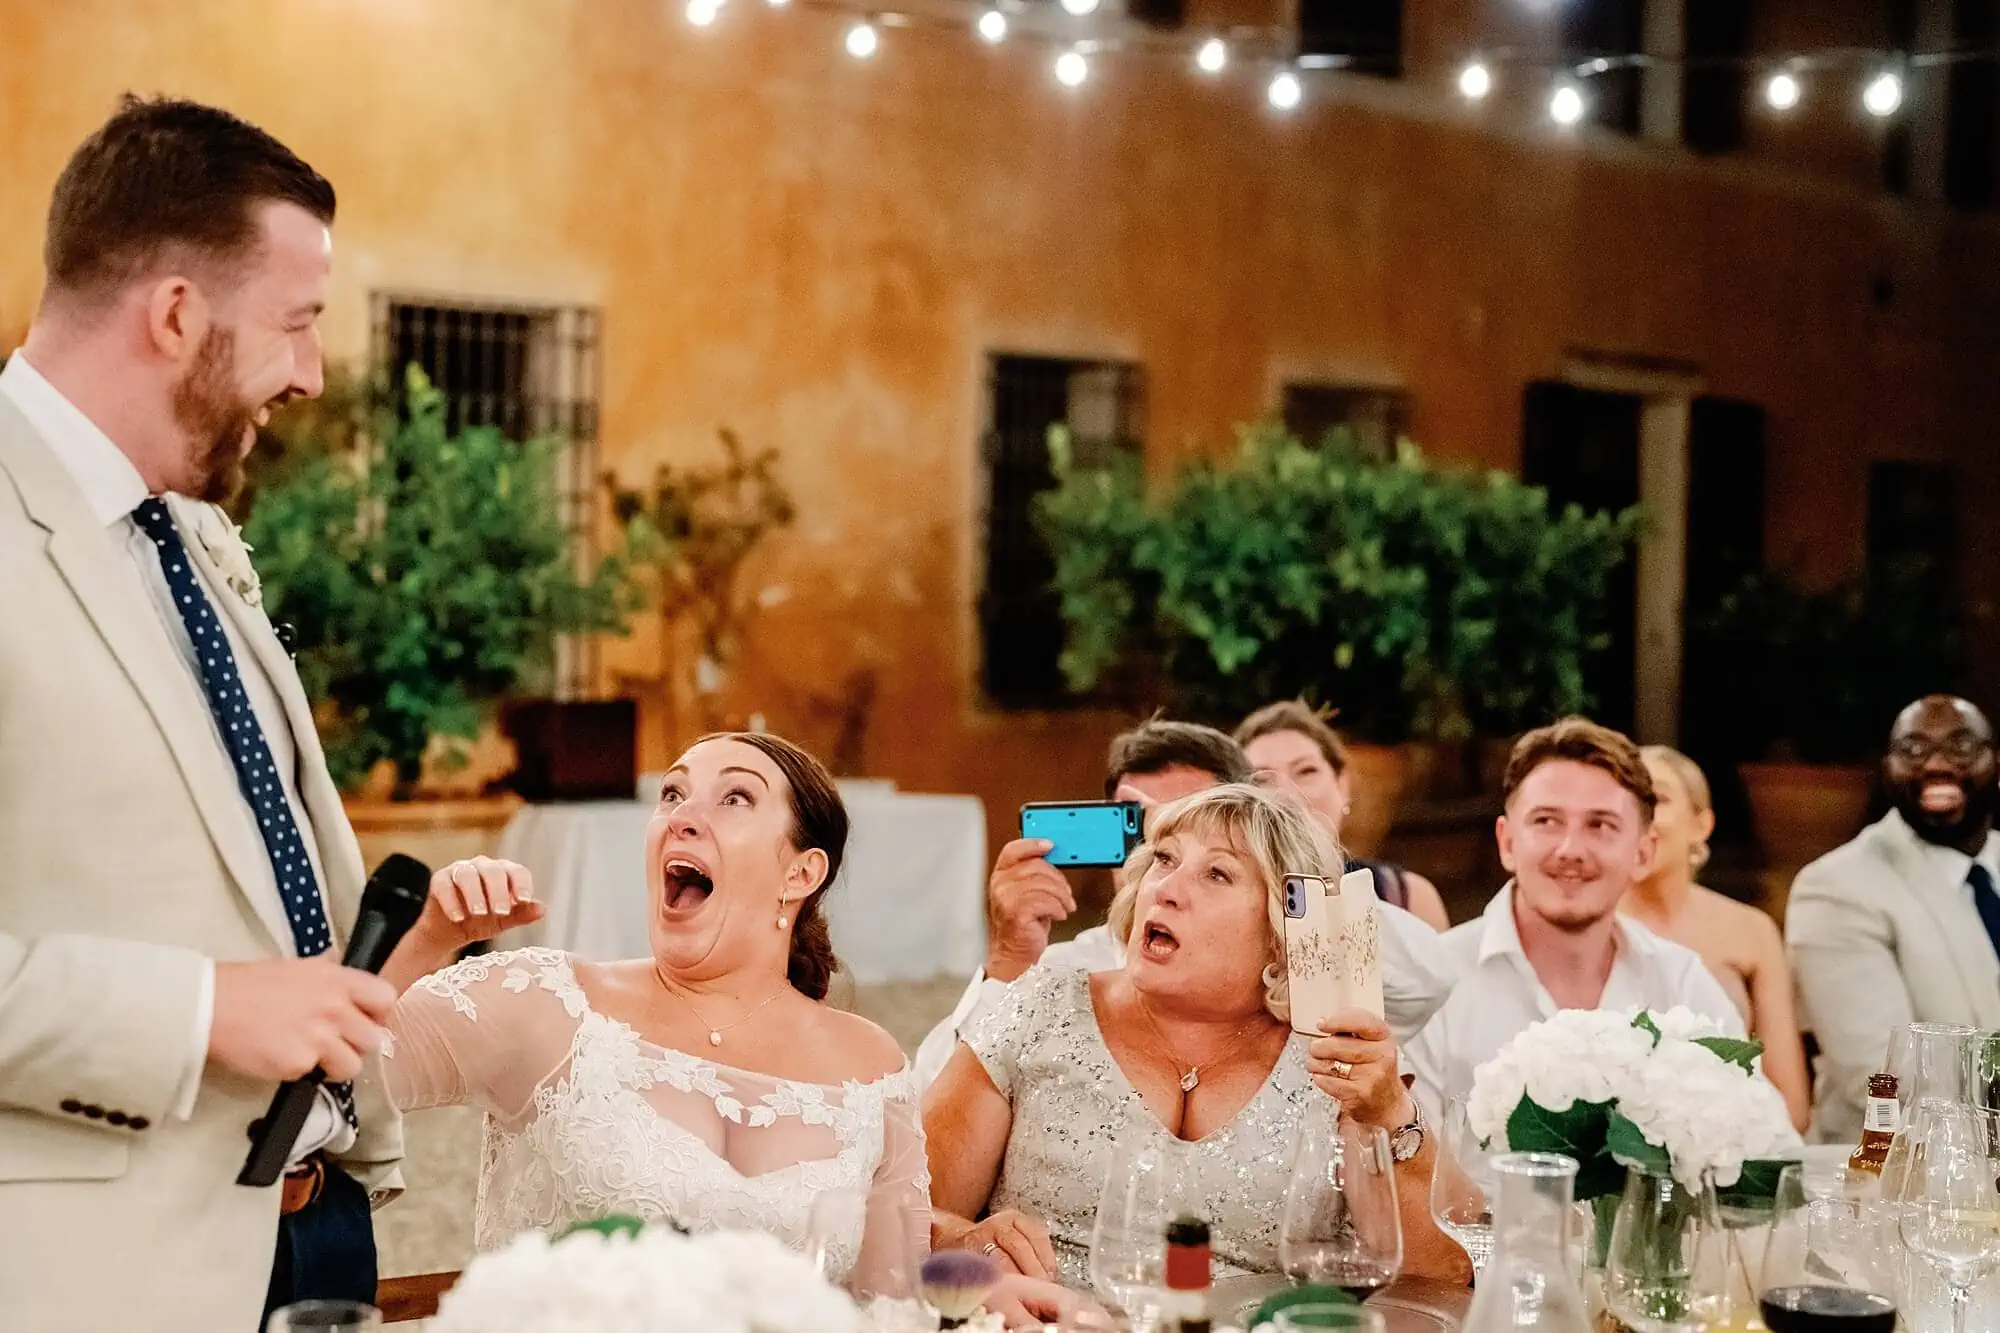 Surprised reaction of the bride and mum during the speeches in Italy